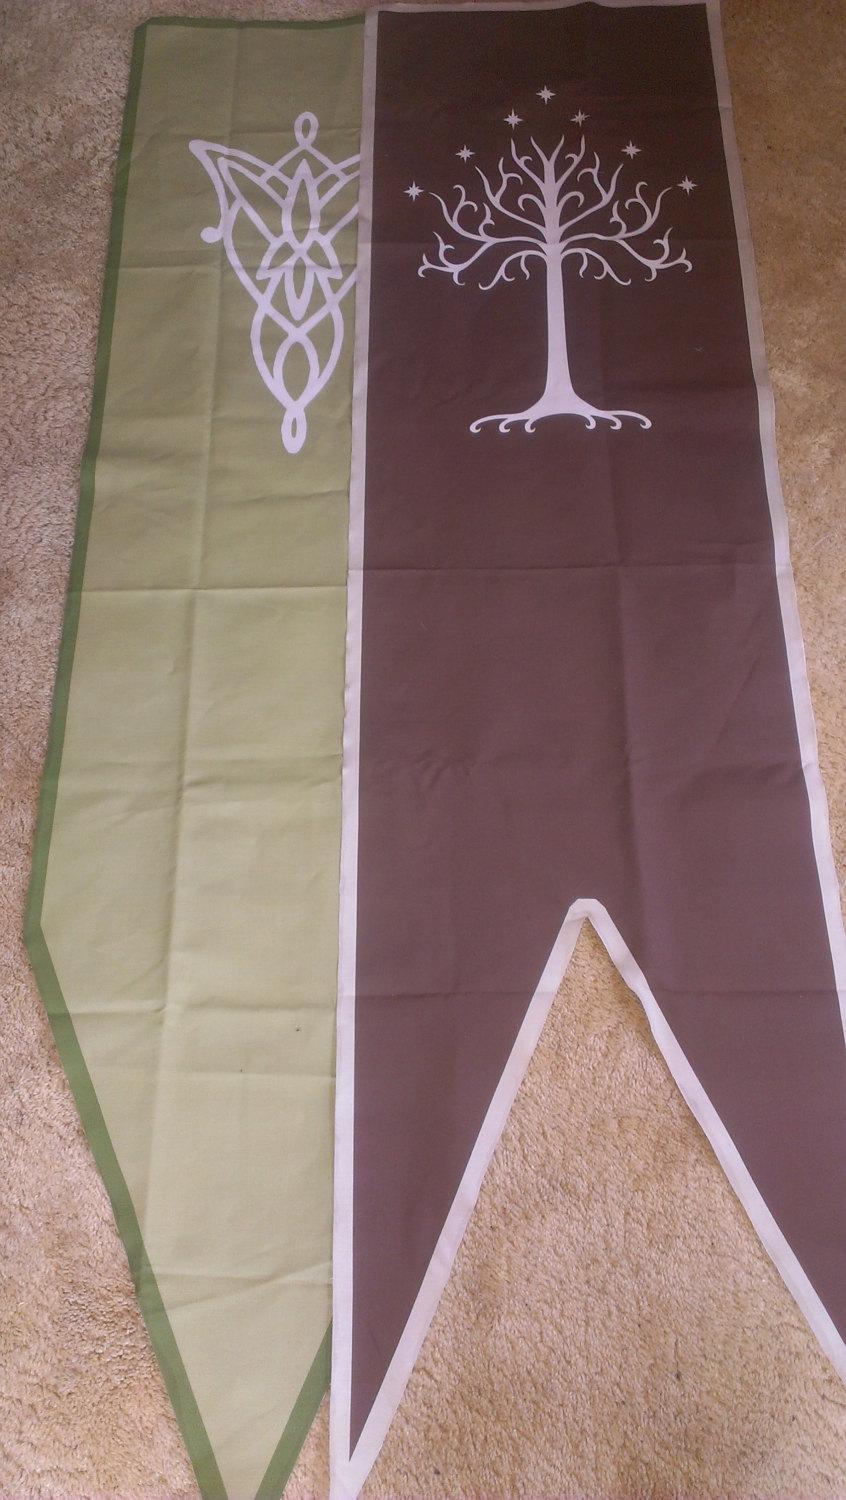 Mariage - Lord of the Rings Wedding Banners Arwen Evenstar Aragorn White Tree of Gondor